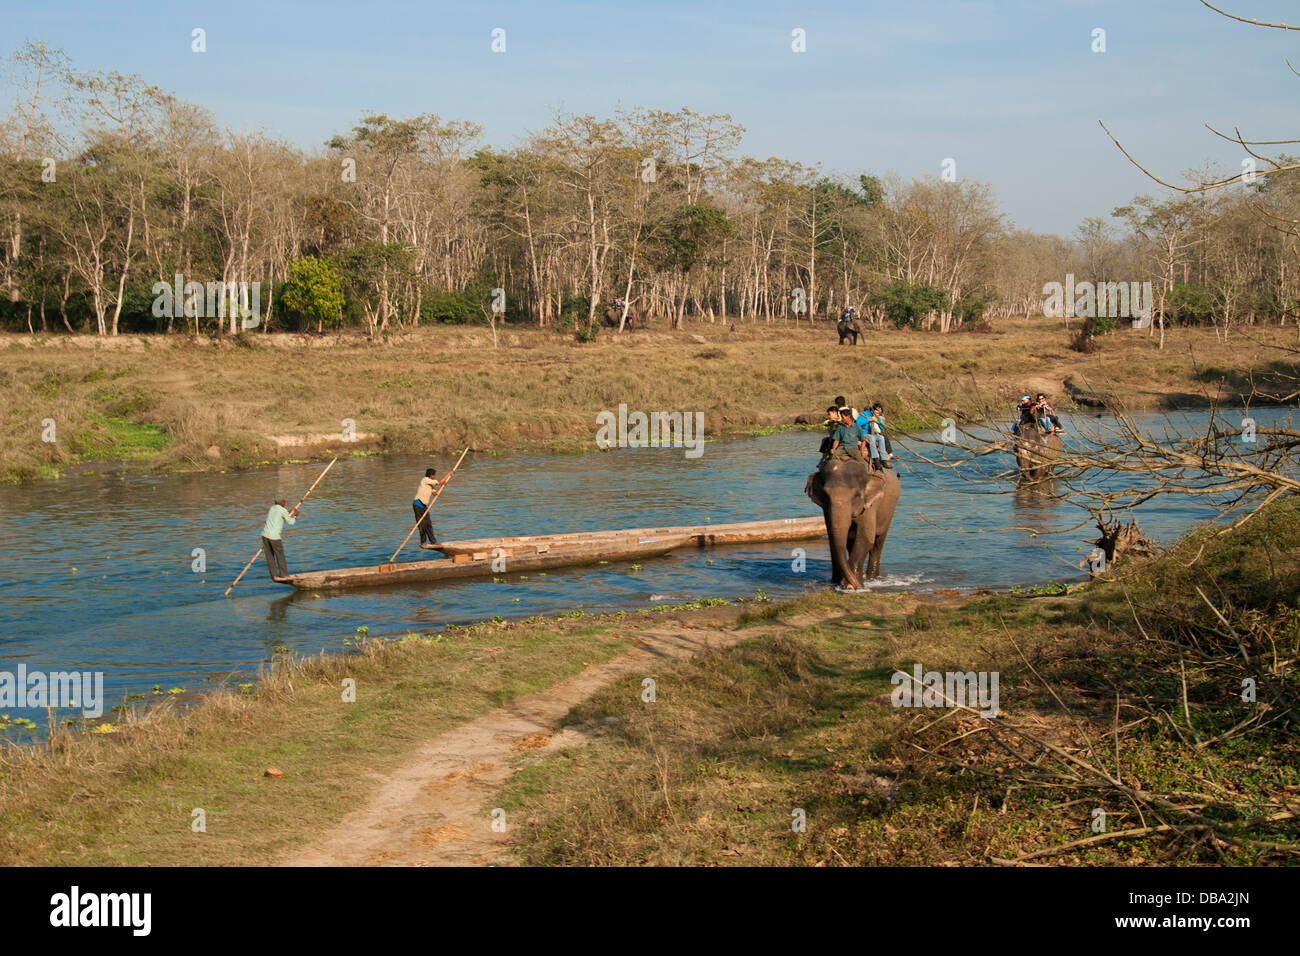 People crossing the river on elephant ride in Chitwan National park in Nepal. Stock Photo